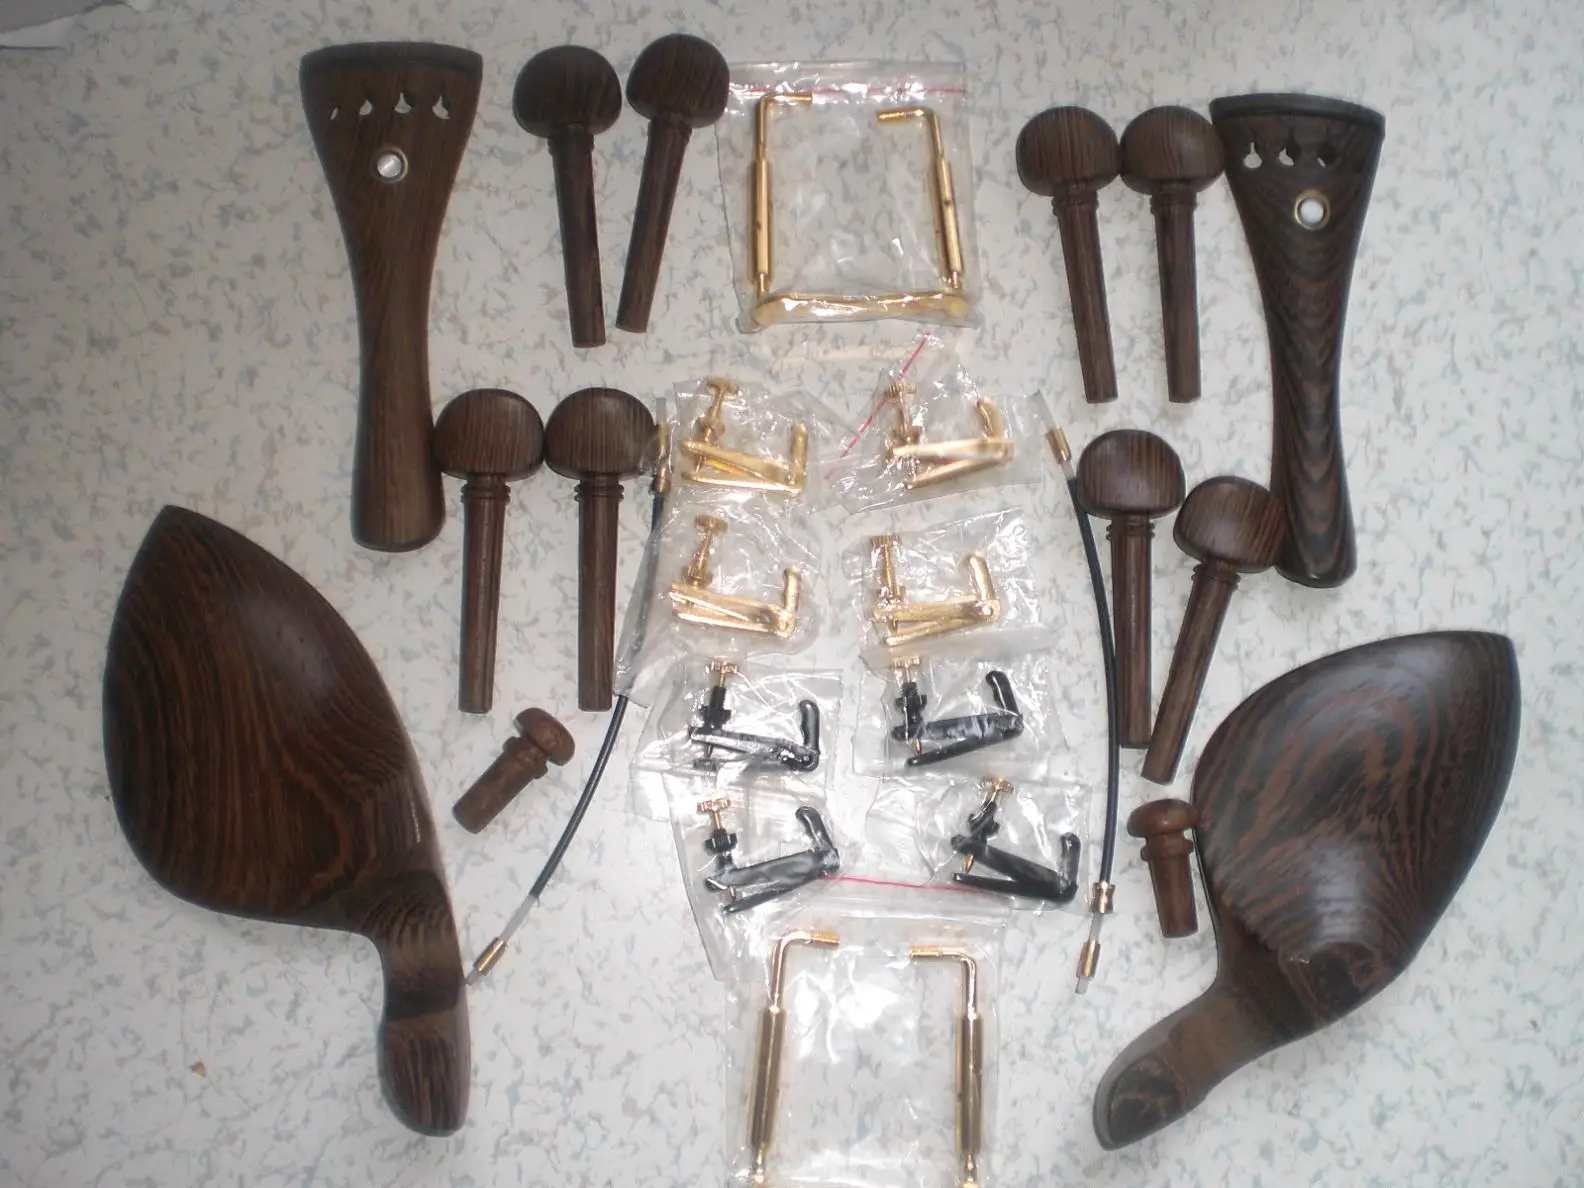 Violin Parts of Wenge Wood Violin Fitting 4/4 Violin Tail Piece Violin Pegs Chin Rest different part as picture show